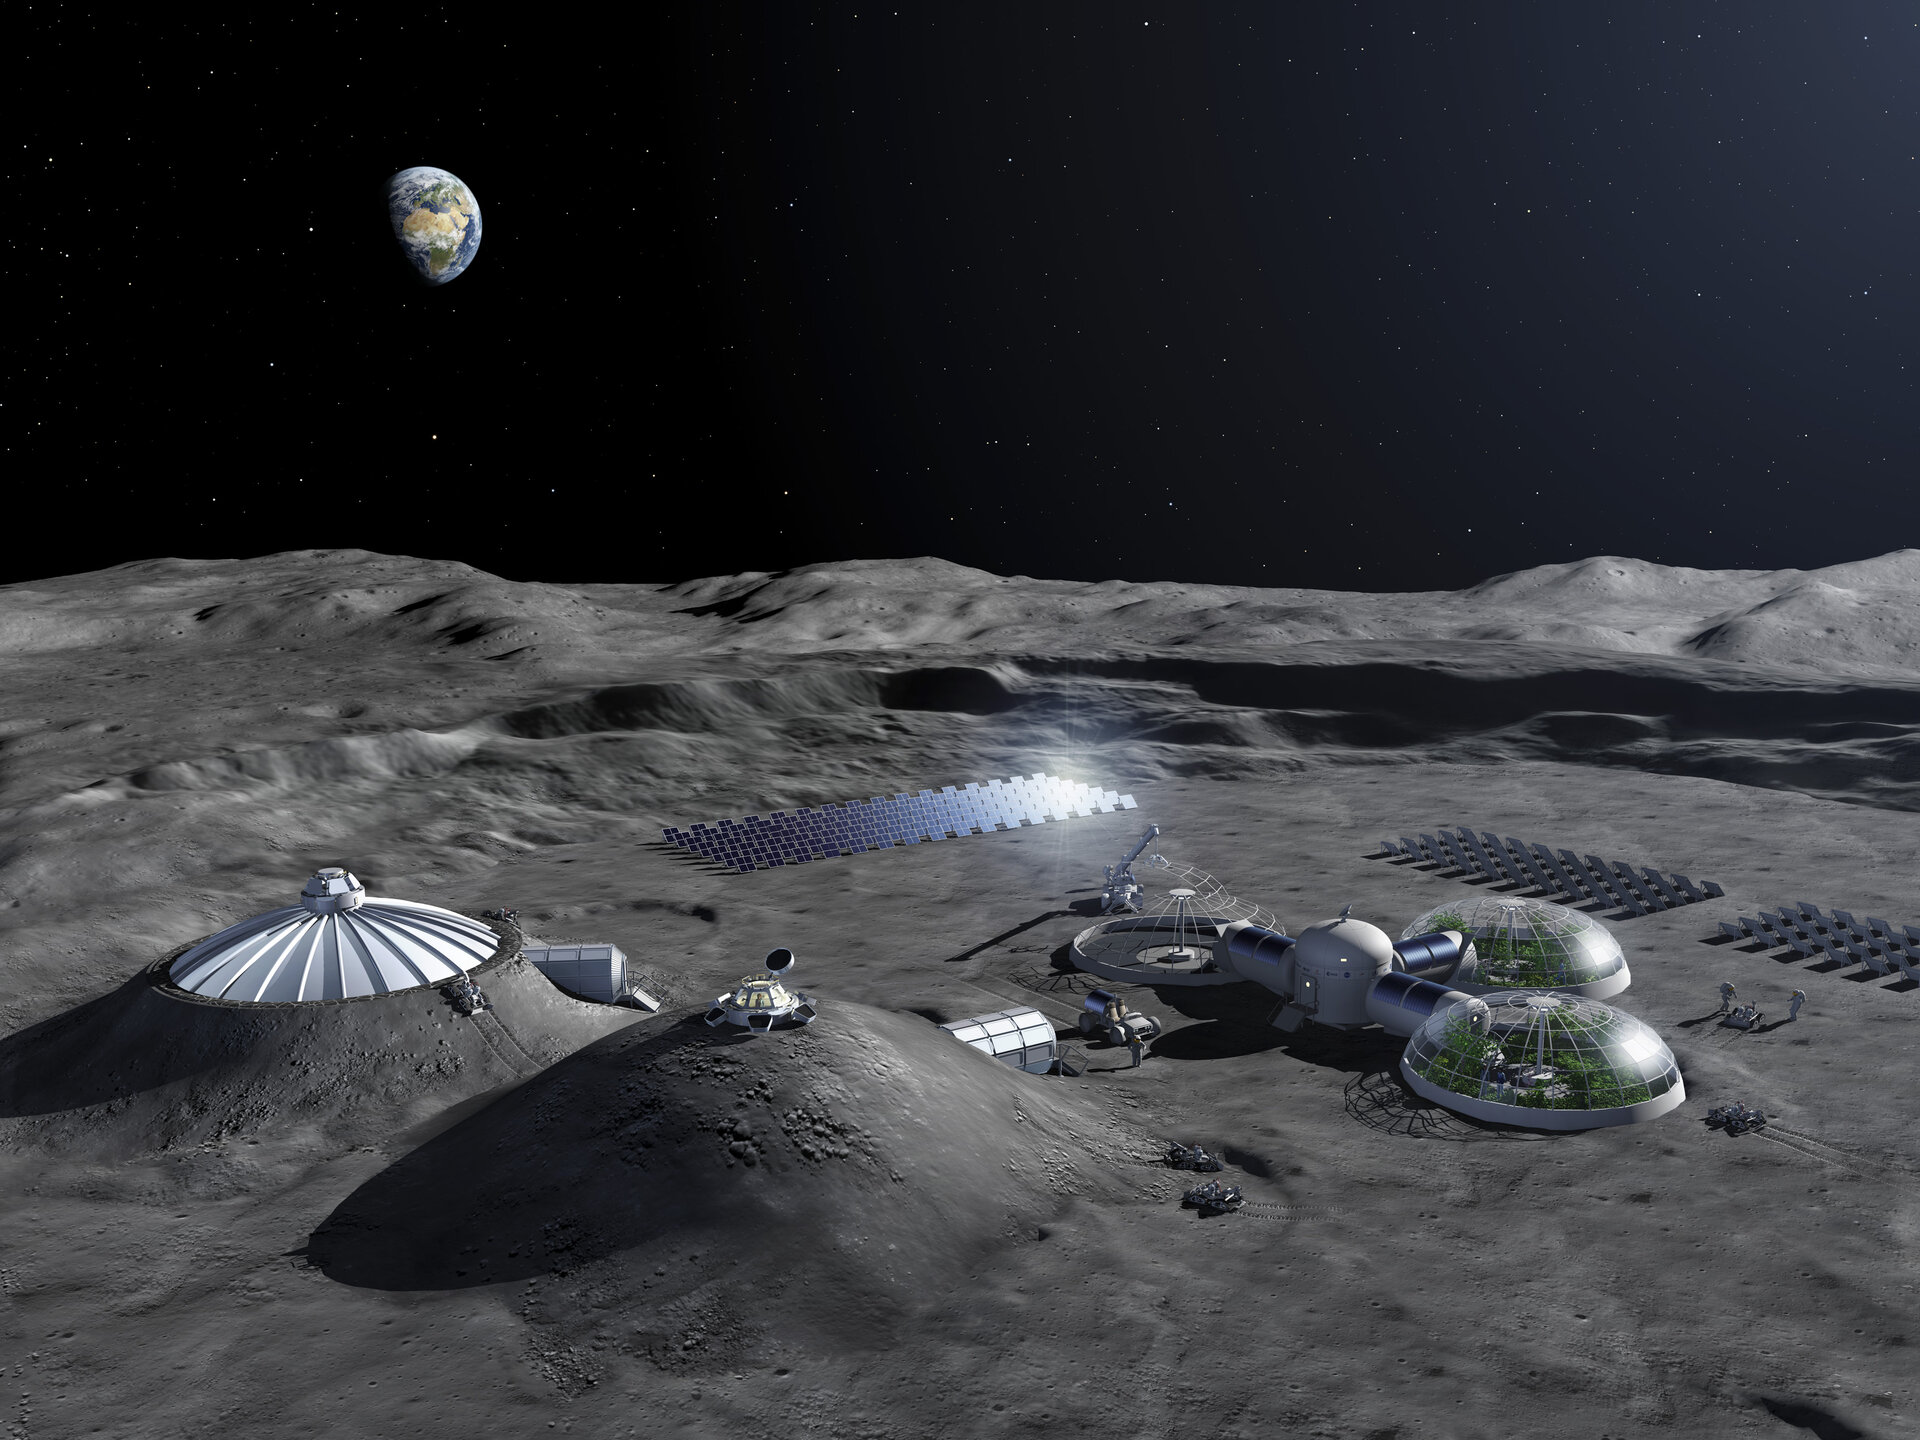 ESA - Artist impression of a Moon Base concept: overview